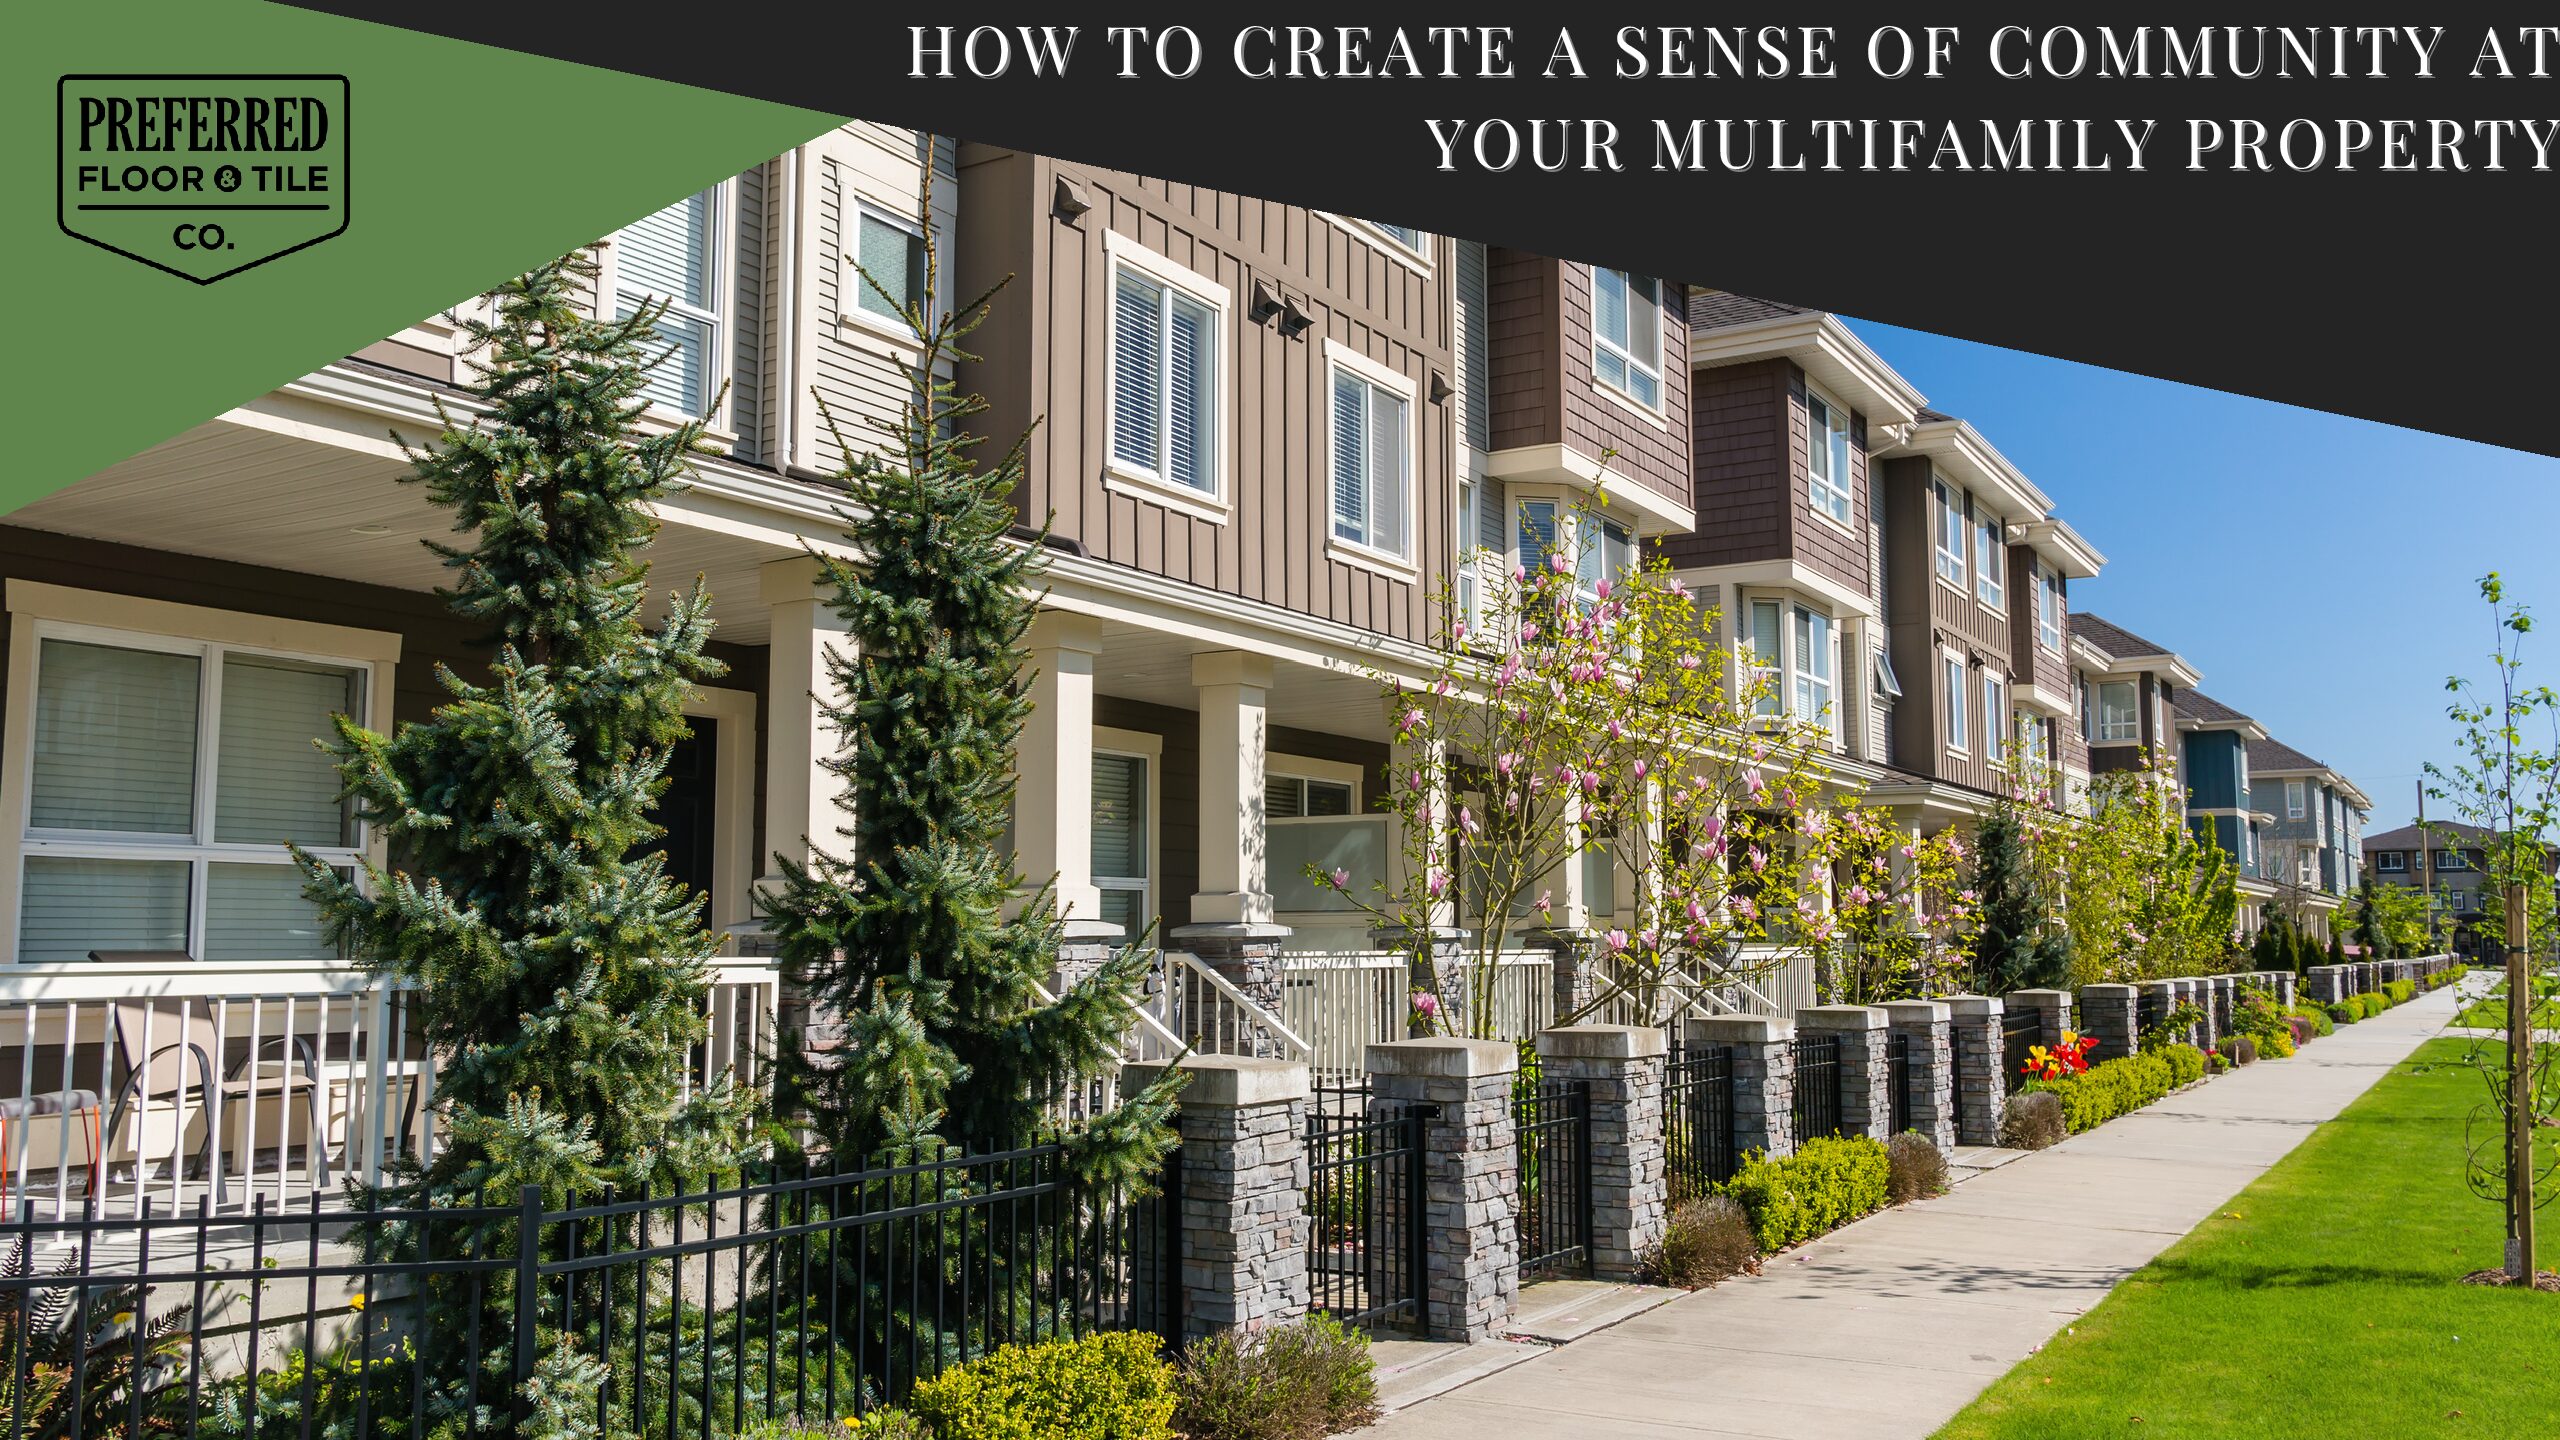 How To Create A Sense of Community at Your Multifamily Property